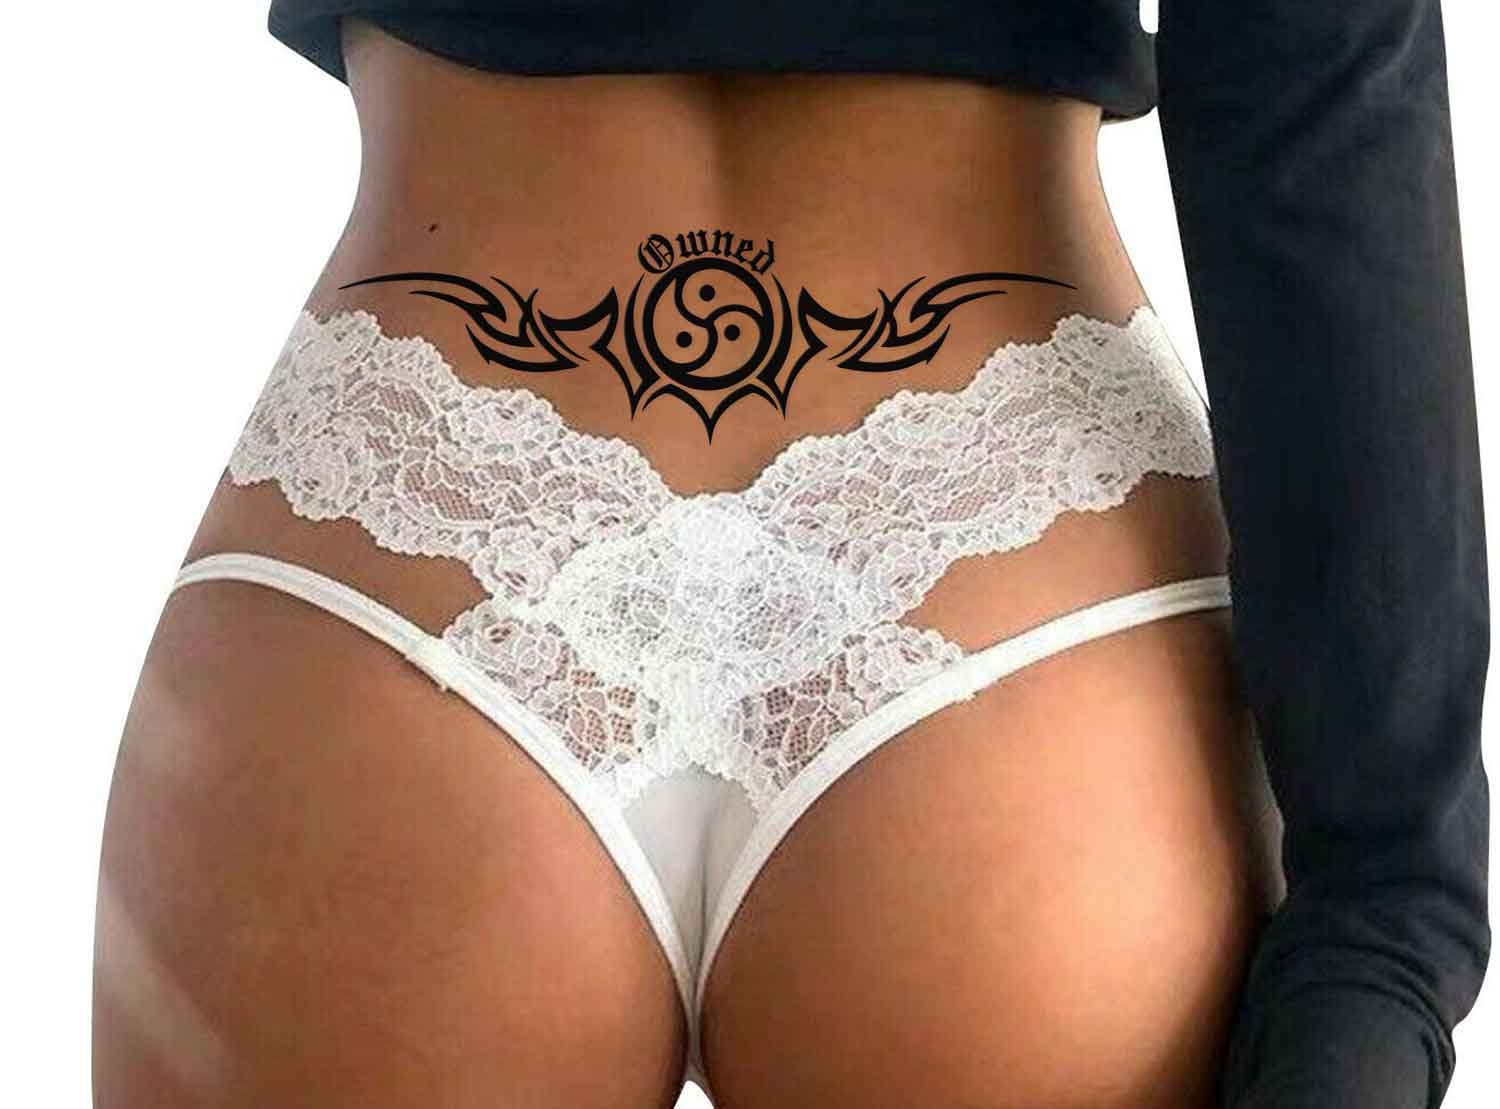 Set of BDSM Adult Temporary Tattoos Tramp Stamps DDLG Lewd photo picture